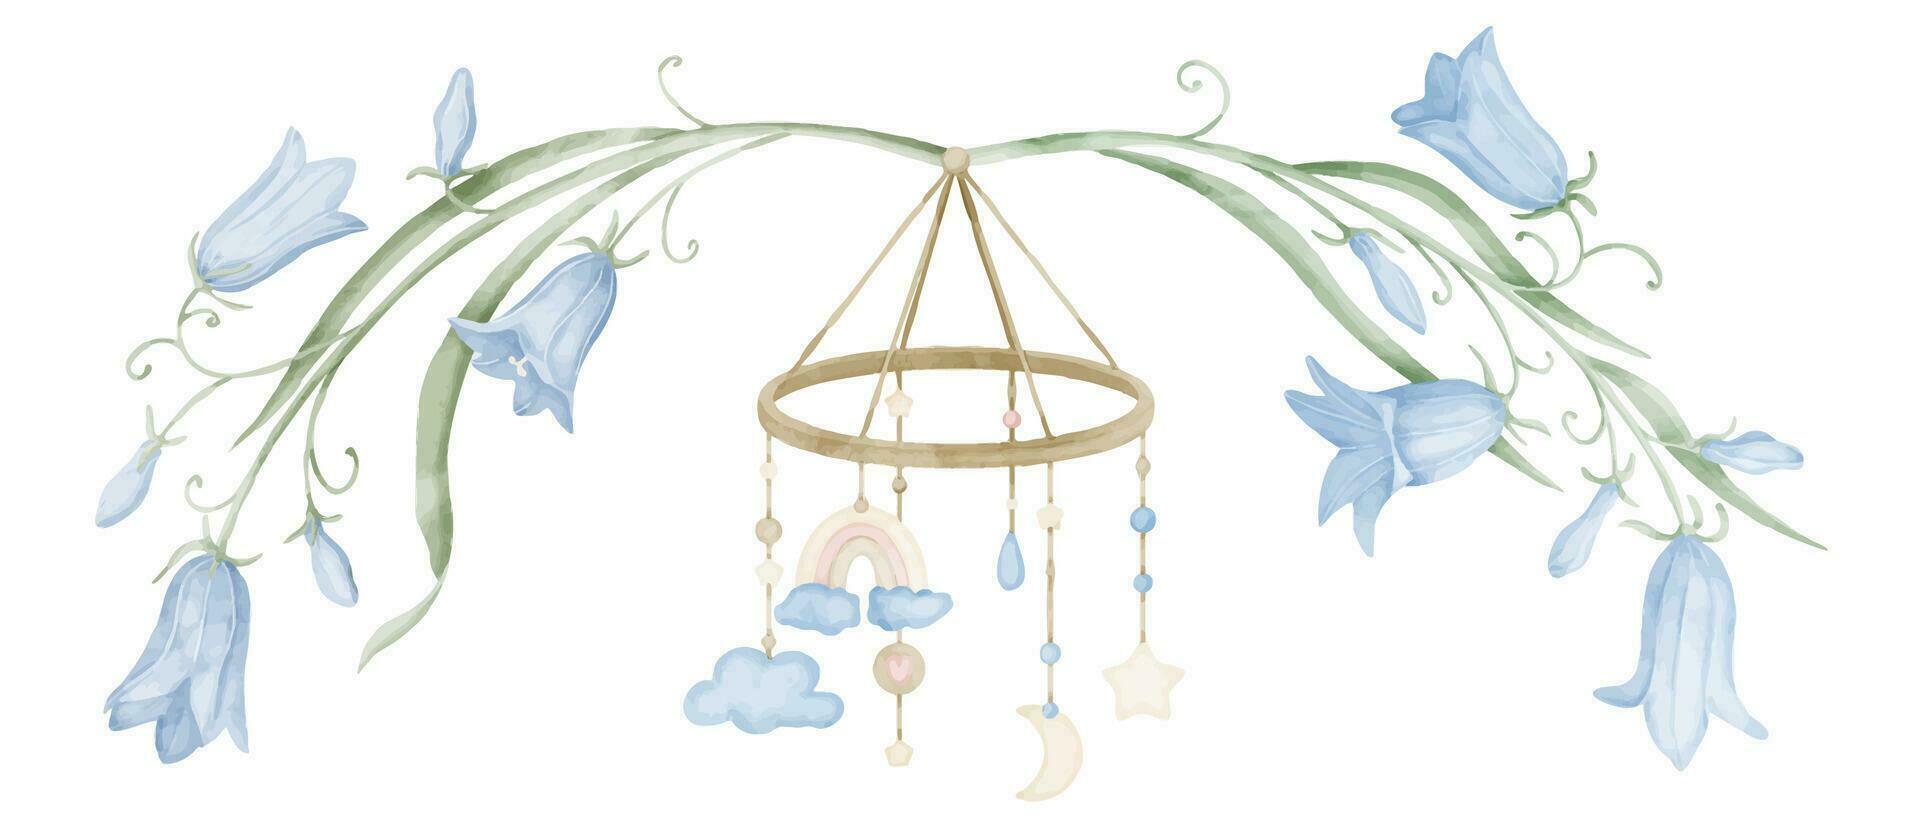 Watercolor childish Hanging Toy with bluebell flowers. Hand drawn illustration of Mobile for kid cradle. Drawing in cute pastel colors for greeting cards or baby shower invitations. Childish design vector